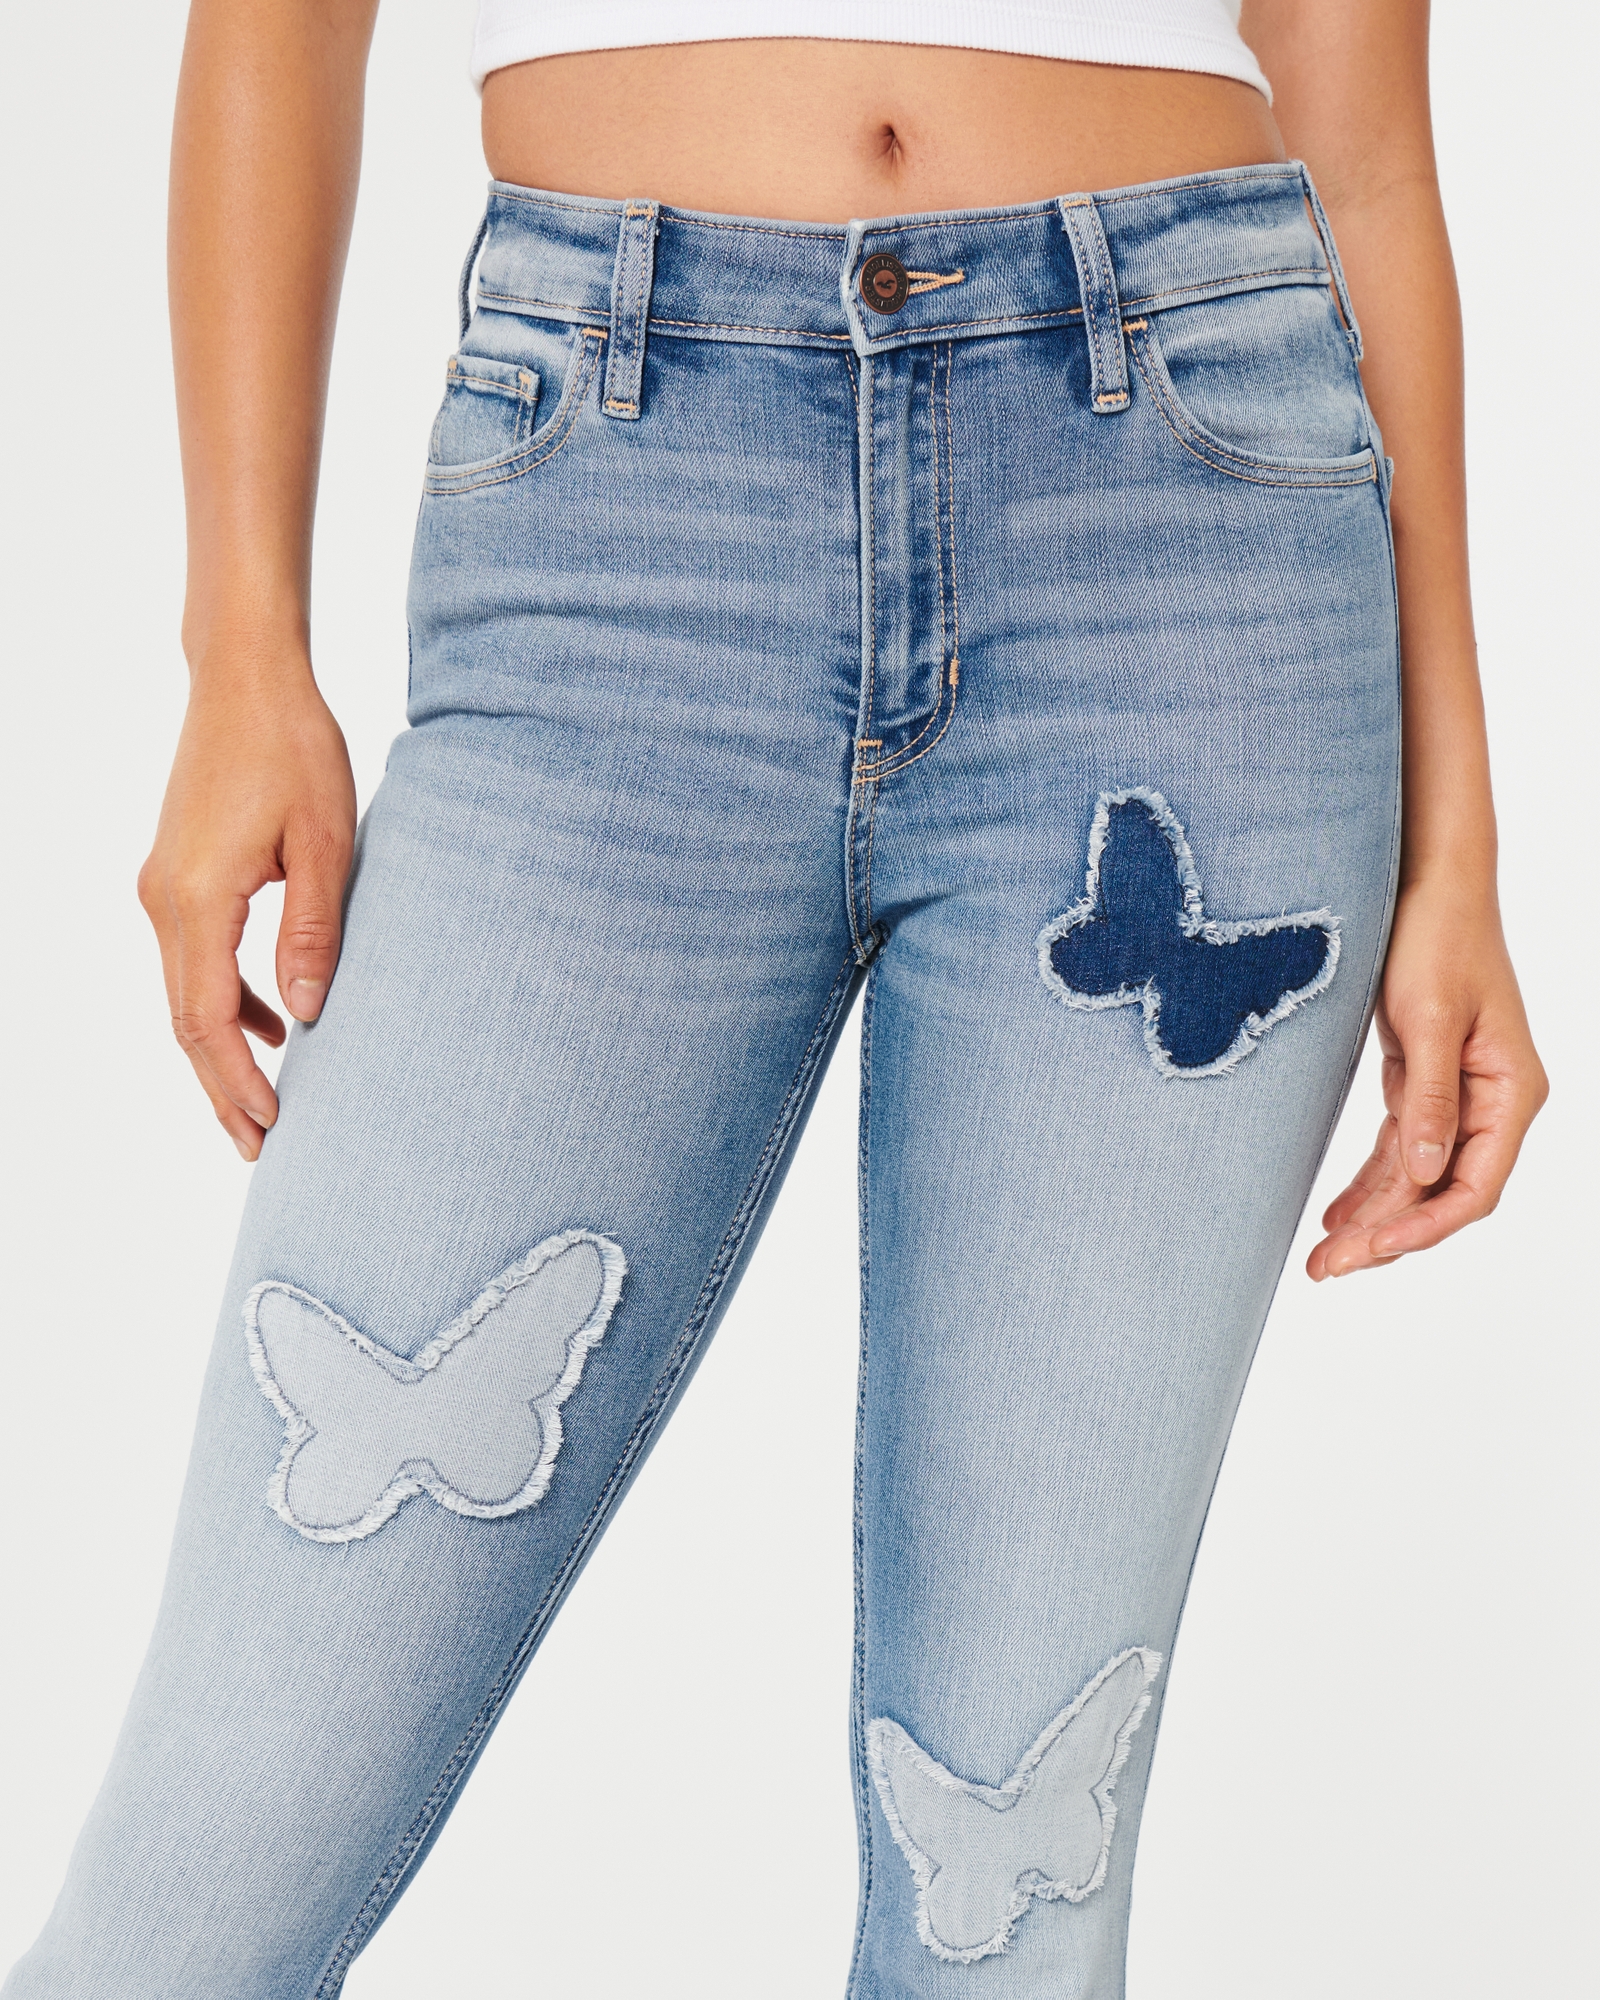 Hollister Flare Jeans Size 26 - $20 (63% Off Retail) - From Brooke